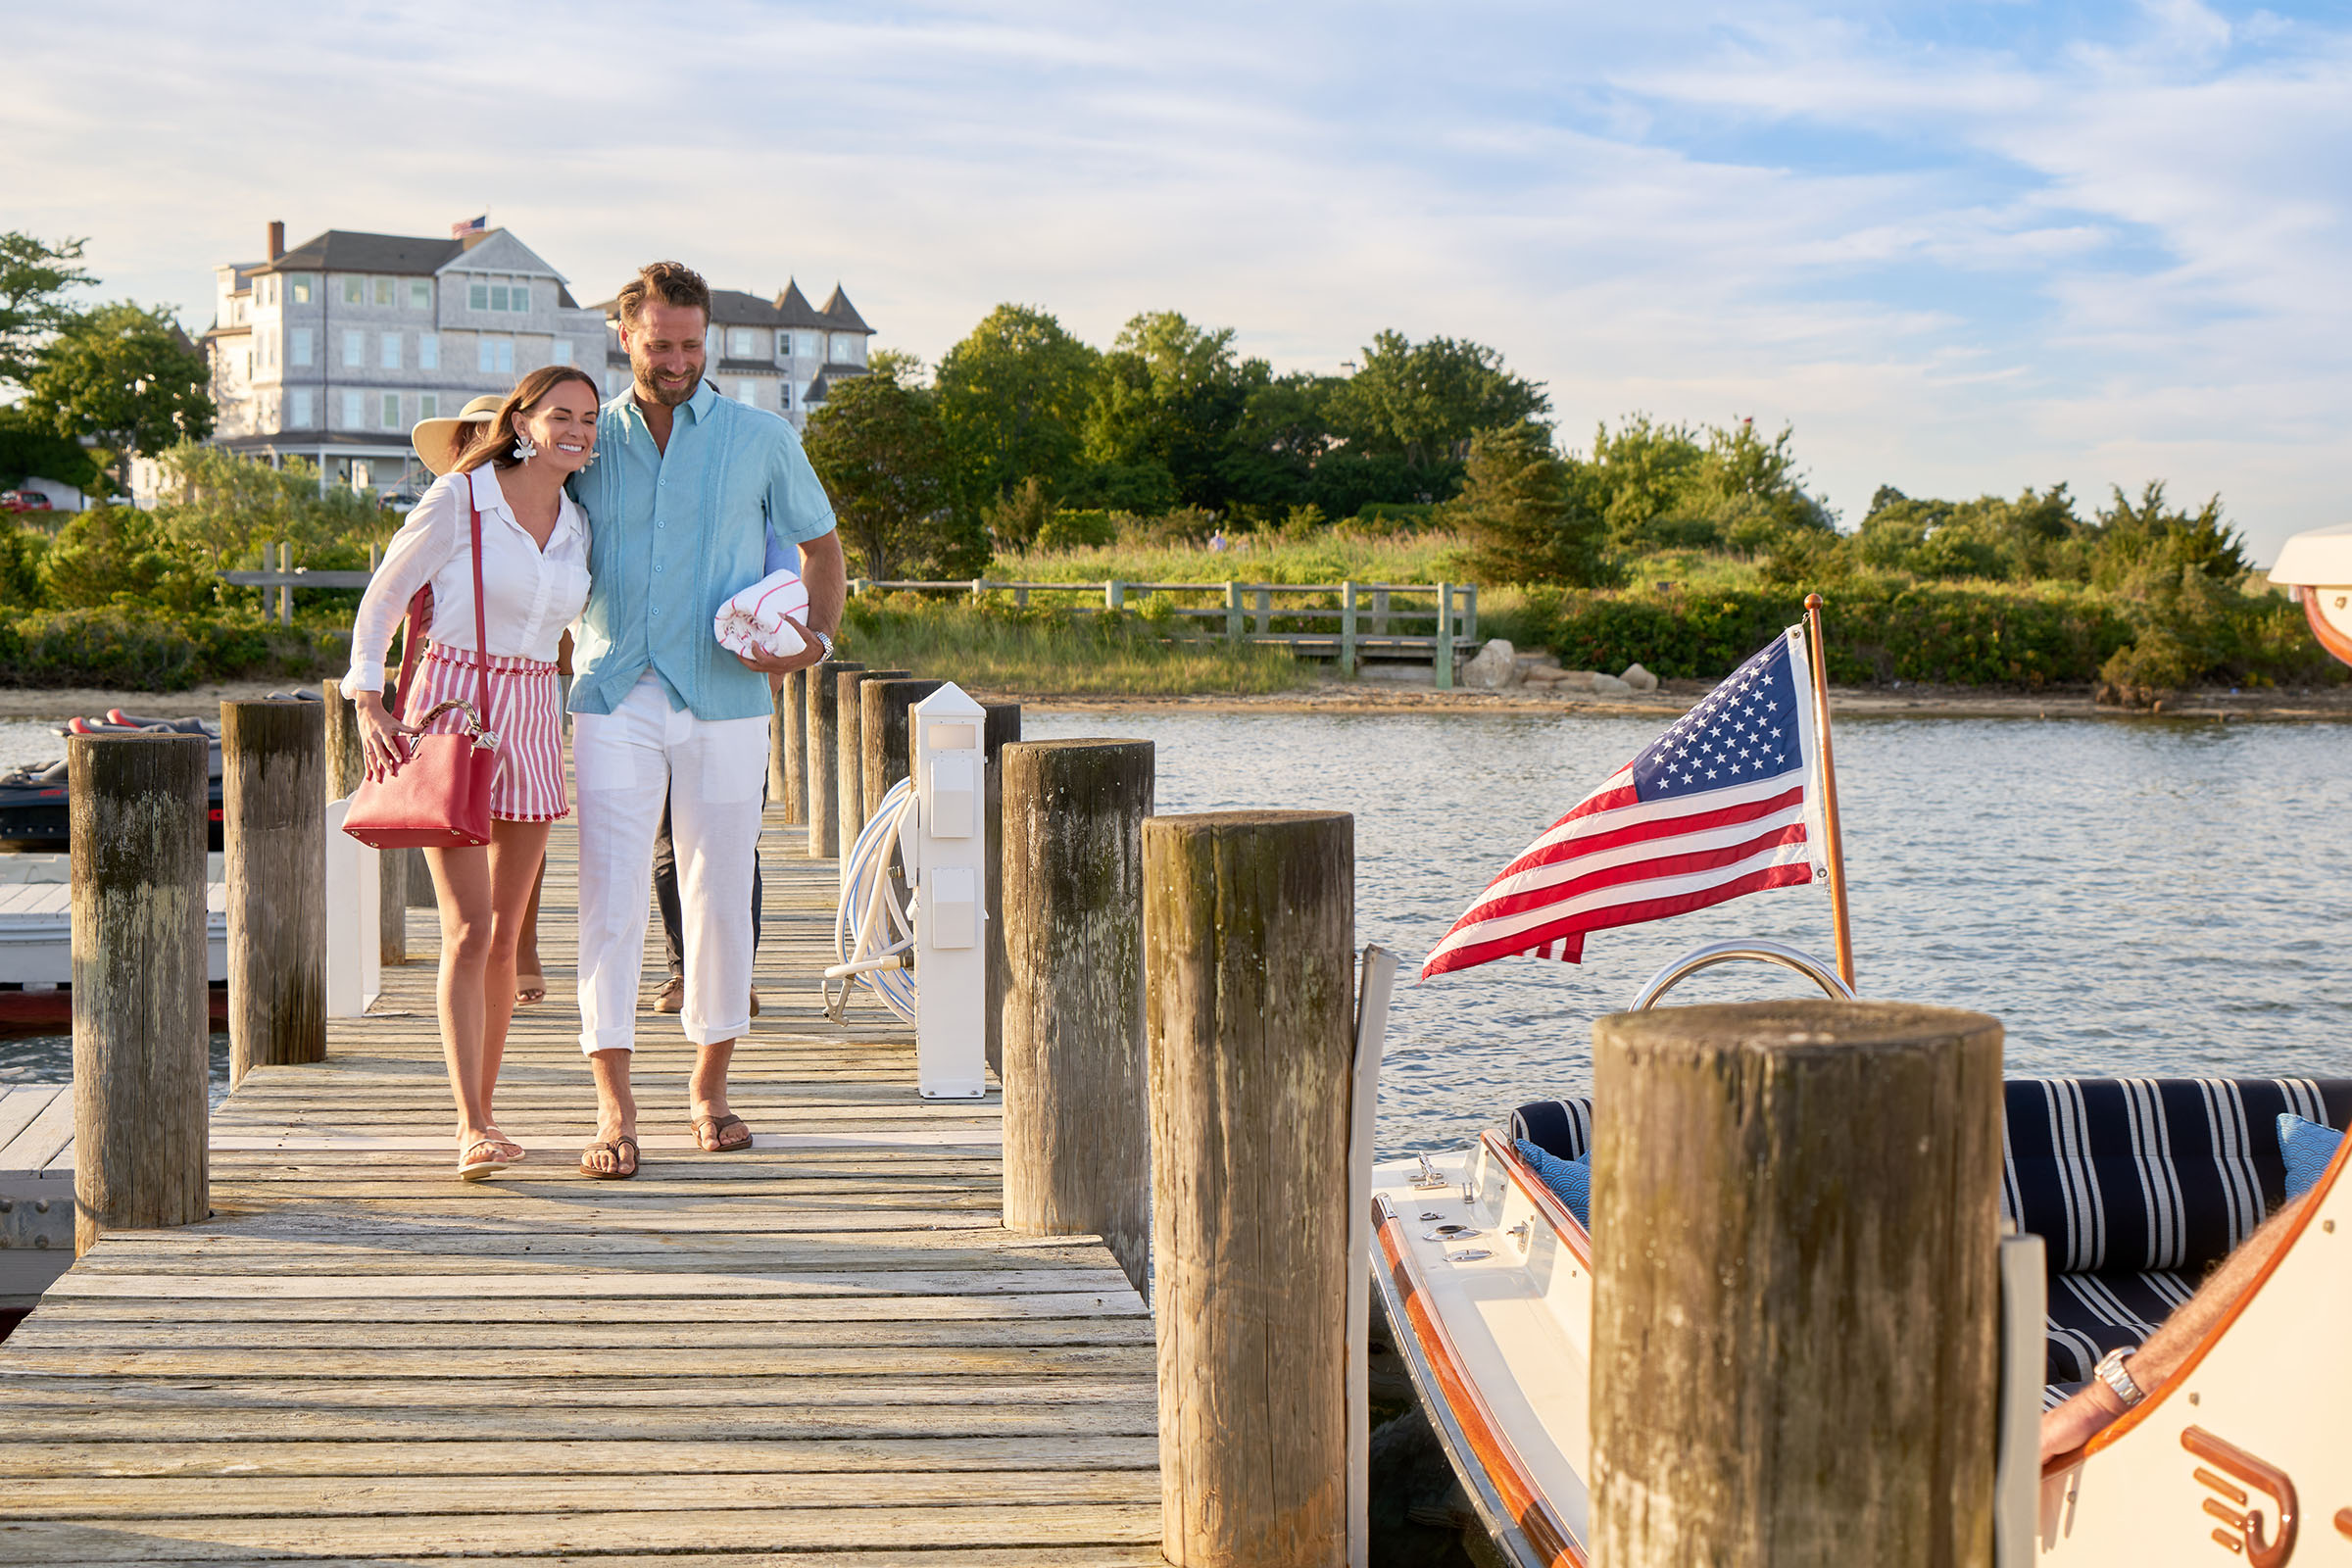 A smiling woman and a man walking on a tan dock to a boat with a USA flag.